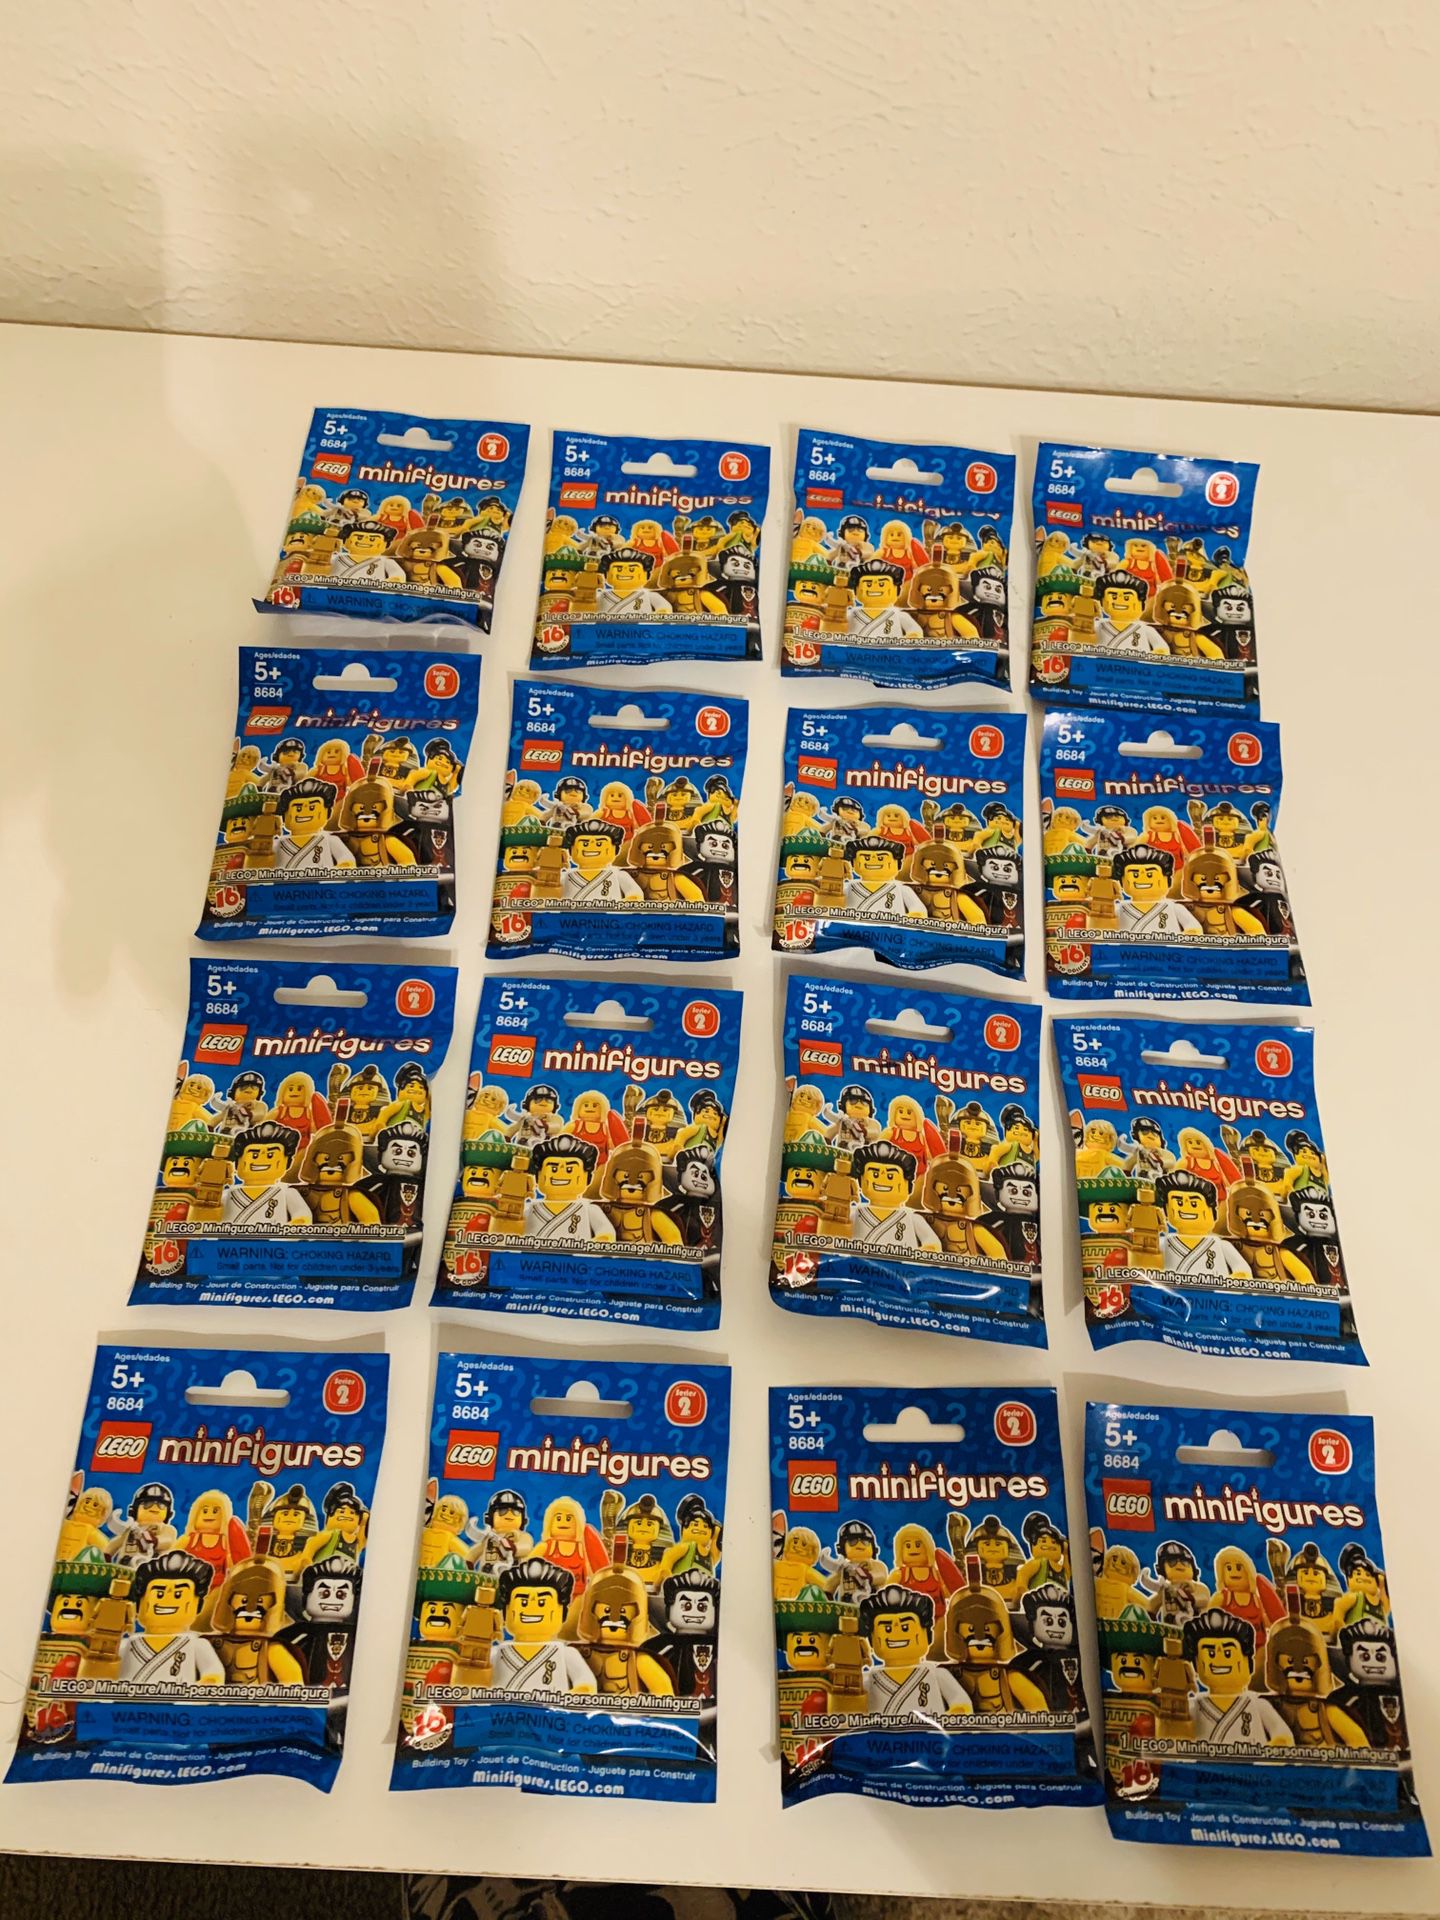 Lego Collectible Minifigures Series 2 Complete Set #8684 Sealed New Rate